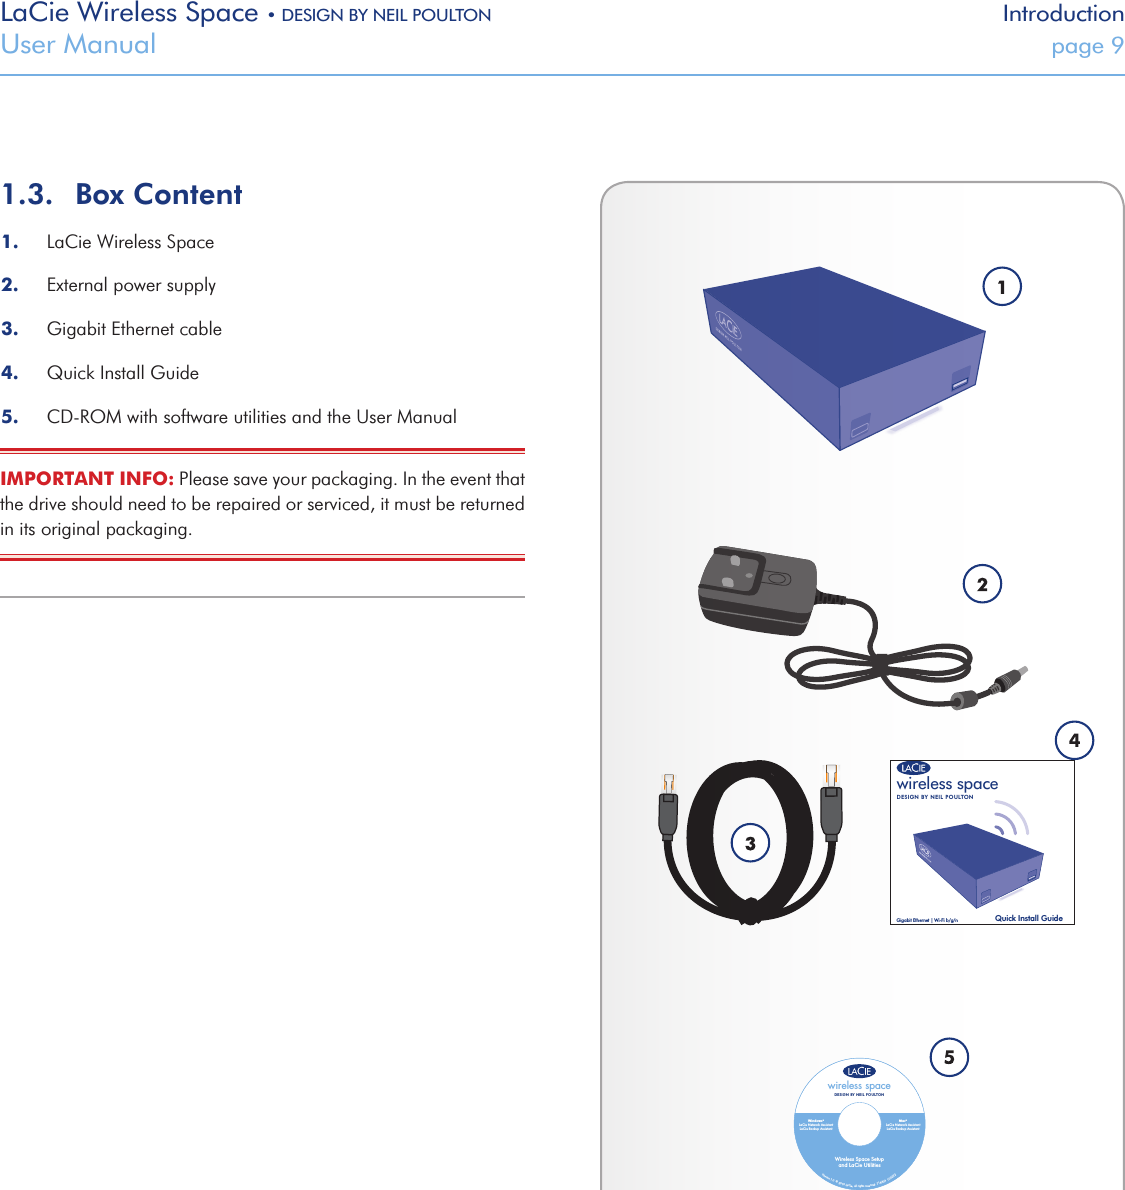 LaCie Wireless Space • DESIGN BY NEIL POULTON IntroductionUser Manual  page 91.3.  Box Content1.  LaCie Wireless Space2.  External power supply3.  Gigabit Ethernet cable 4.  Quick Install Guide5.  CD-ROM with software utilities and the User ManualIMPORTANT INFO: Please save your packaging. In the event that the drive should need to be repaired or serviced, it must be returned in its original packaging. wireless spaceDESIGN BY NEIL POULTONQuick Install GuideGigabit Ethernet | Wi-Fi b/g/nVersion 1.0  © 2010 LaCie, all rights reserved. 714404  100222wireless spaceWireless Space Setupand LaCie UtilitiesDESIGN BY NEIL POULTONMagenta prints as white.Light blue color: PMS 284.Dark blue color: PMS 2758.Windows®LaCie Network AssistantLaCie Backup AssistantMac®LaCie Network AssistantLaCie Backup Assistant